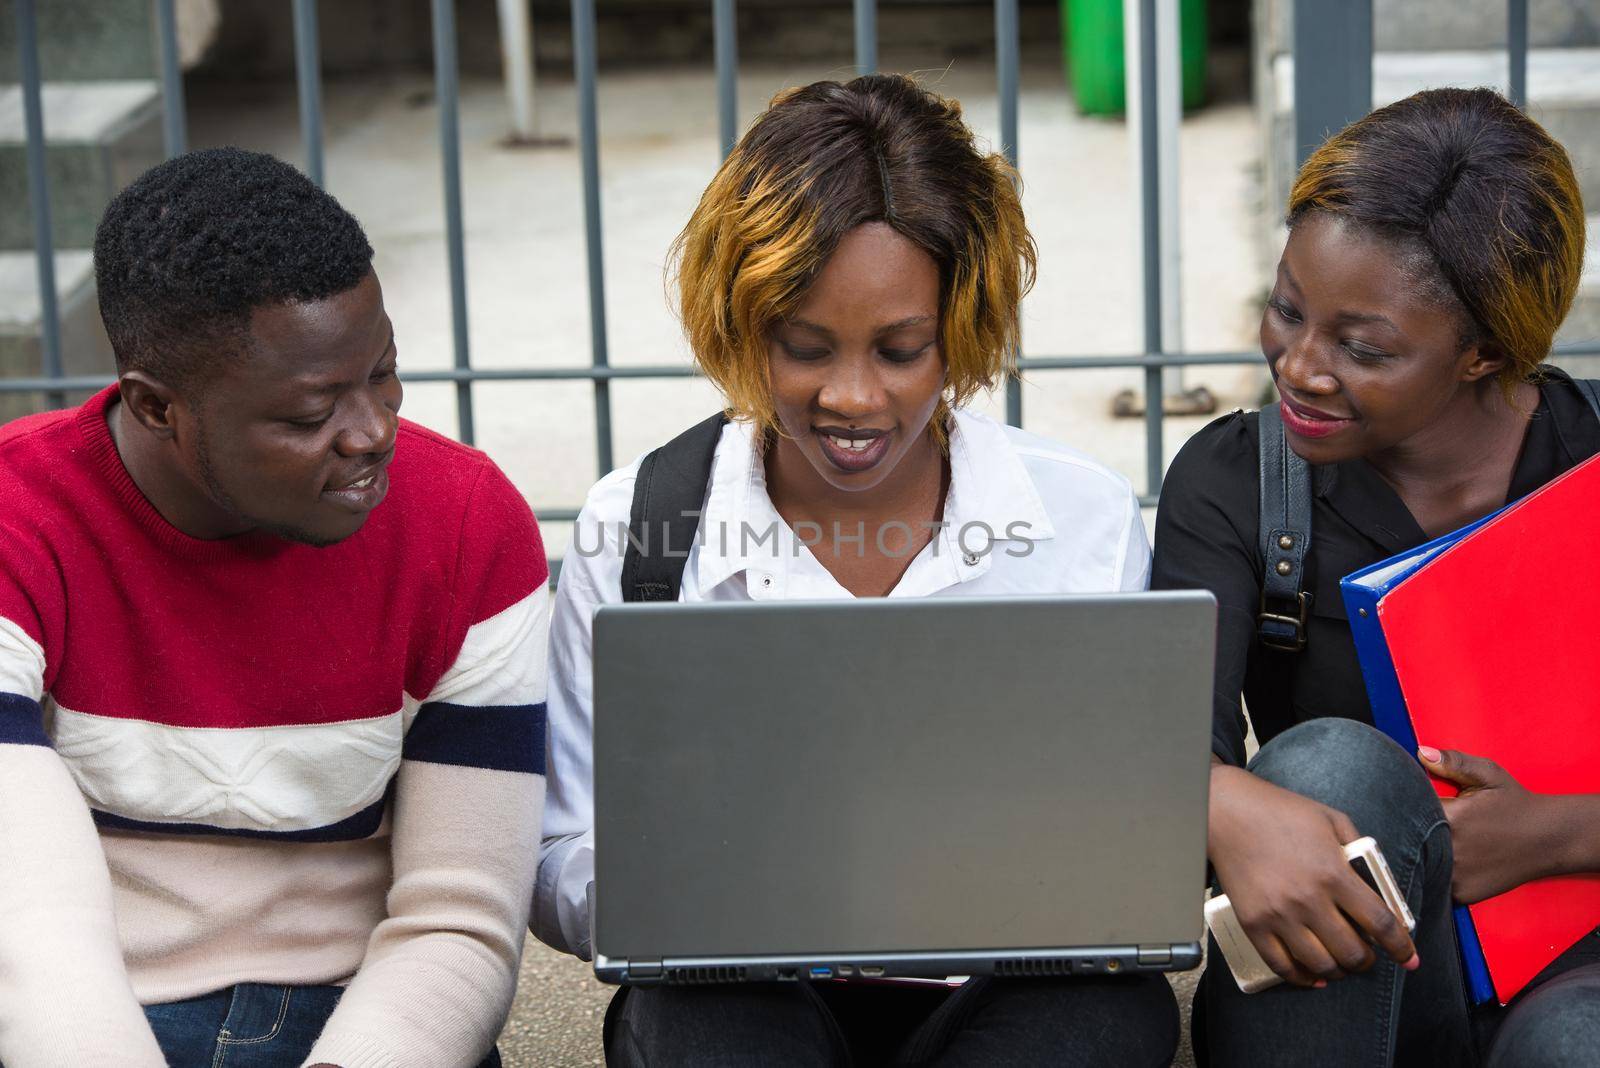 Group of attractive smiling young casual dressed students using laptop sitting outdoors on campus of university.